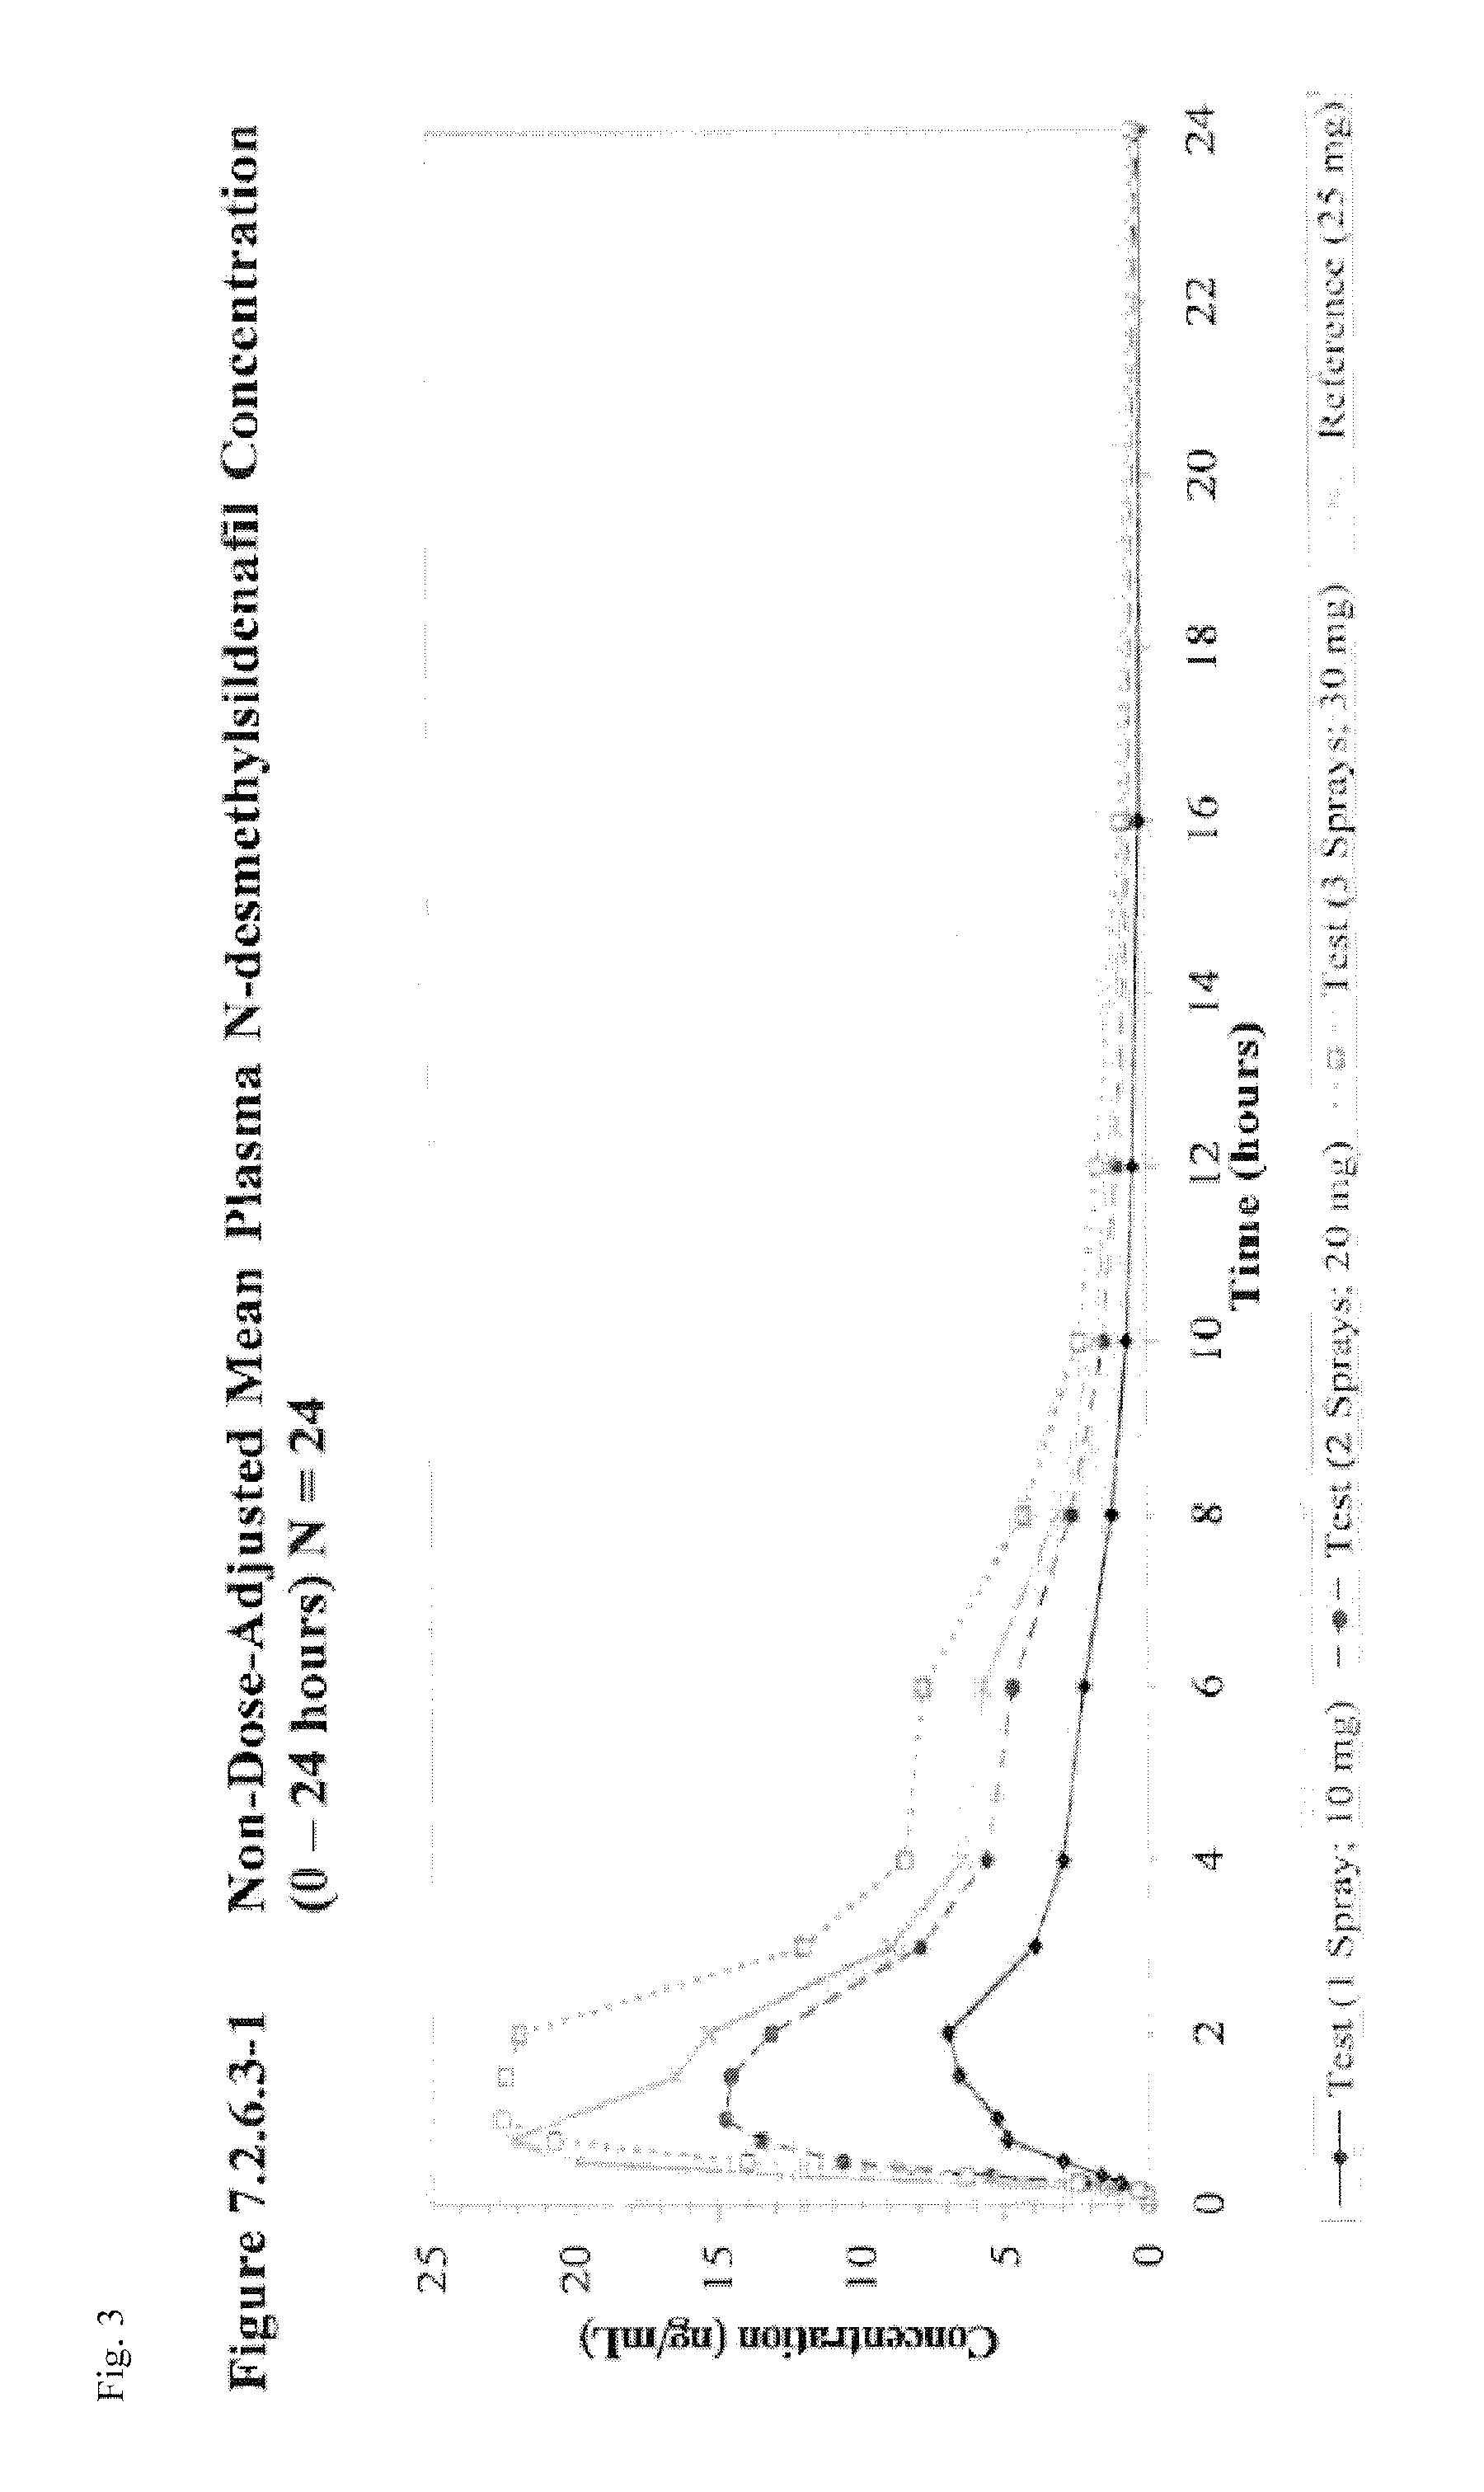 Oral spray formulations ad methods for administration of sildenafil